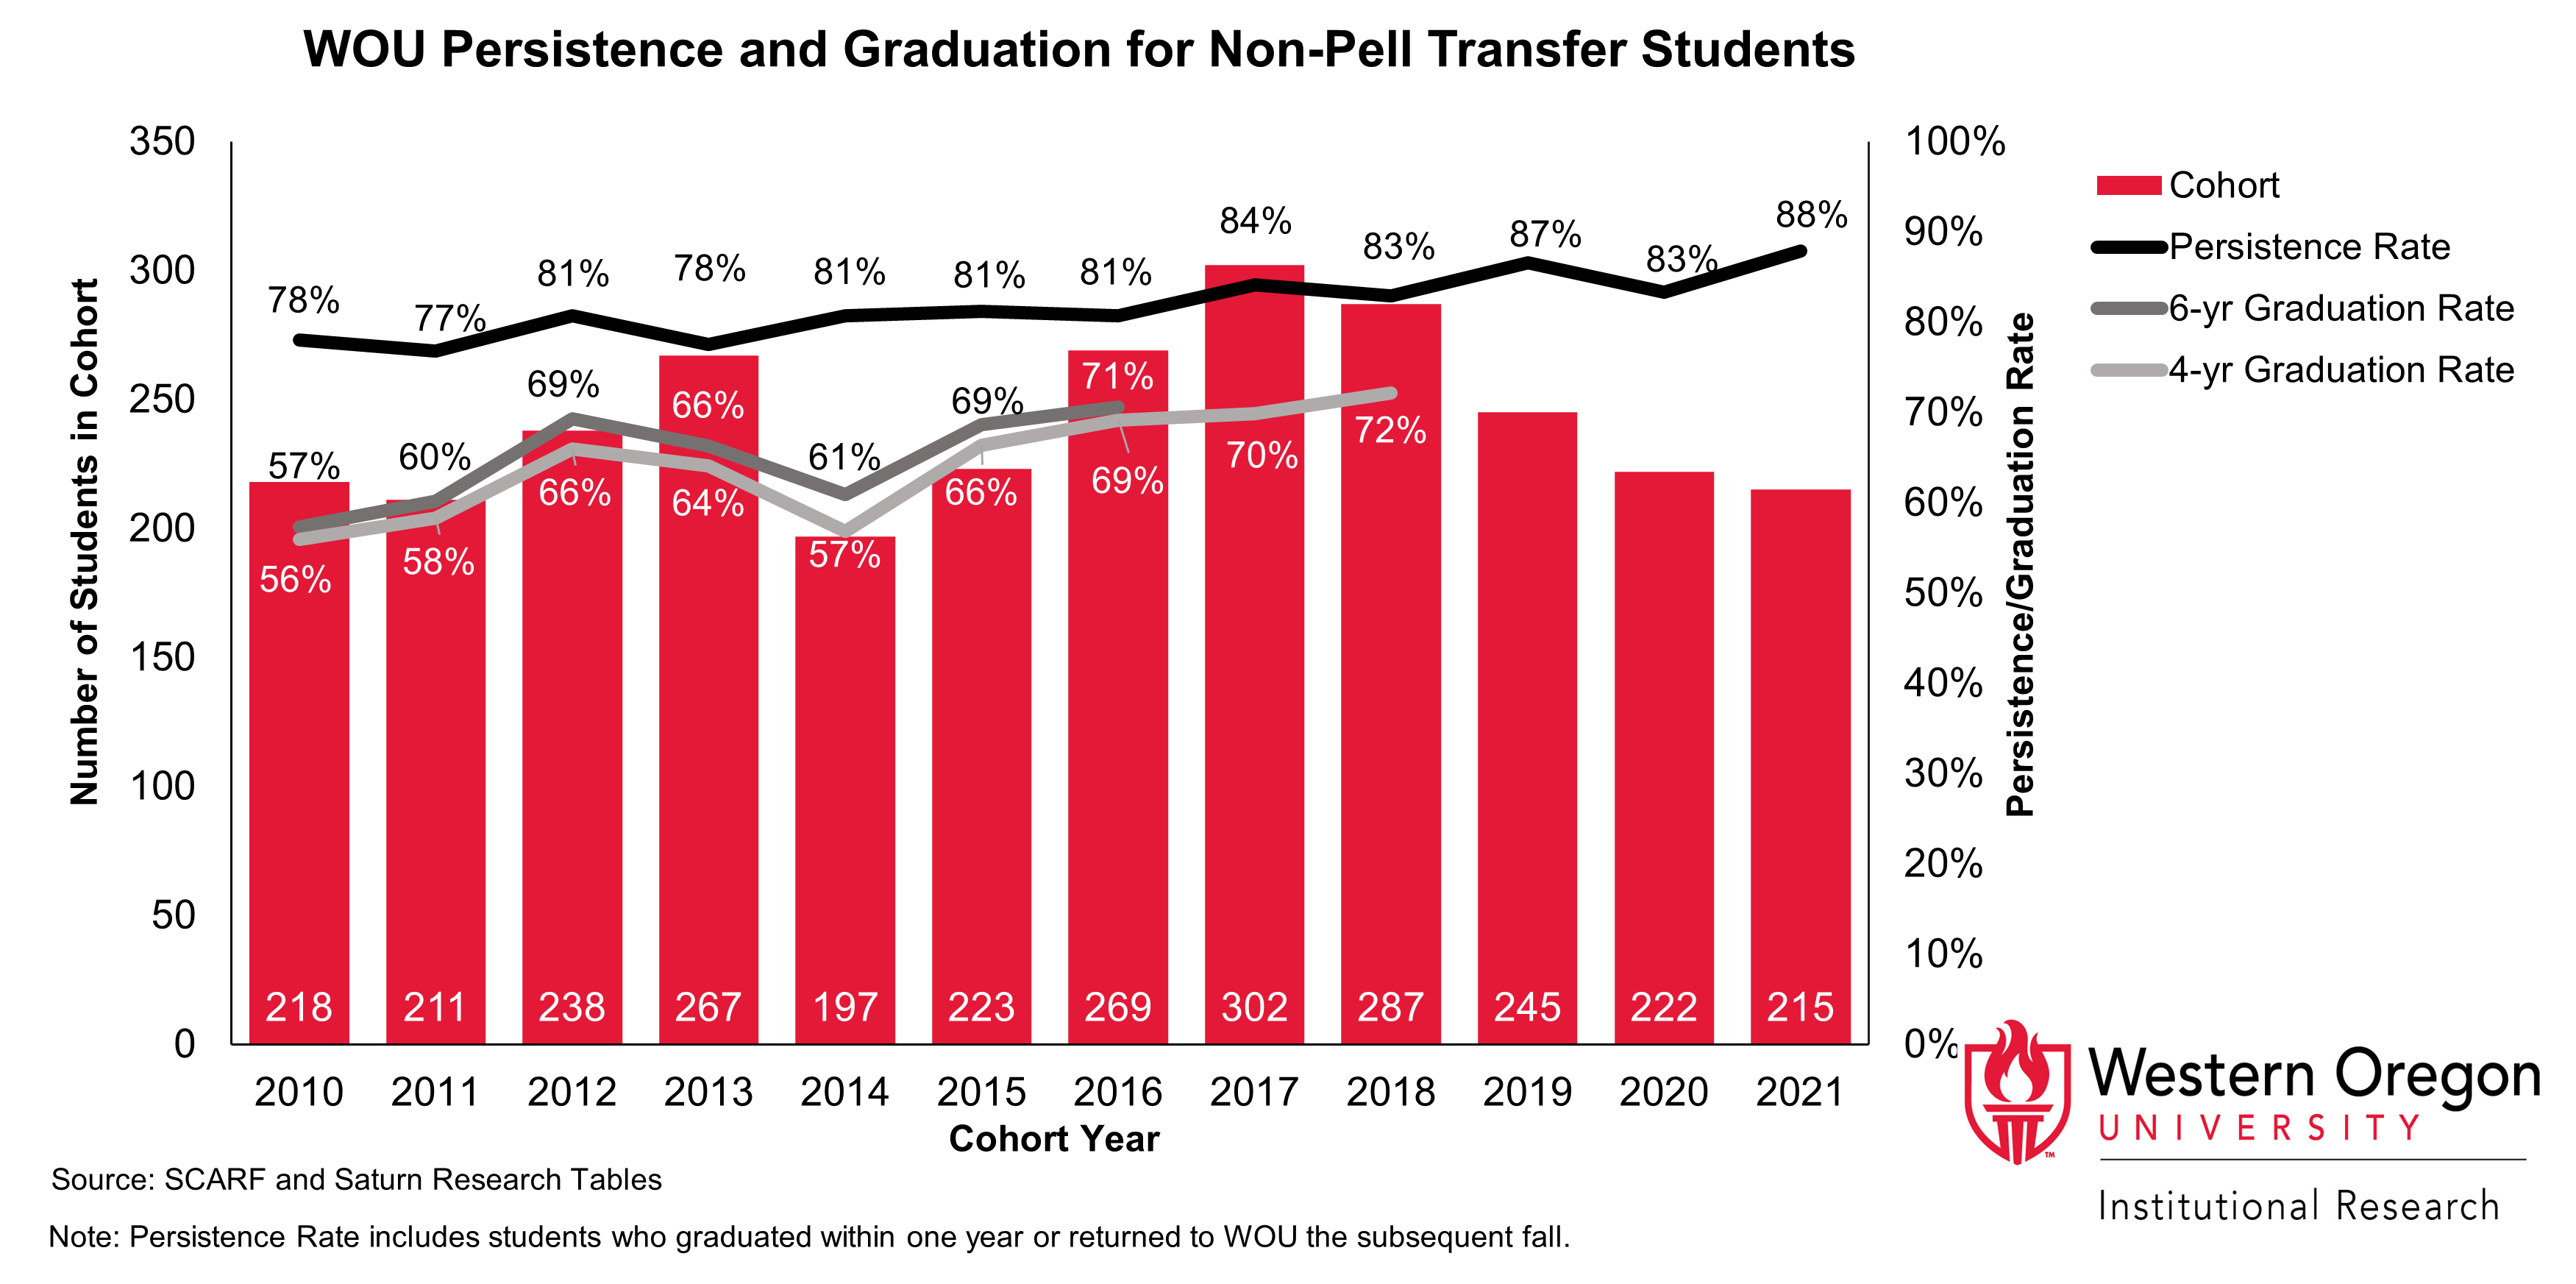 Bar and line graph of retention and 4- and 6-year graduation rates since 2010 for WOU transfer students that are not Pell recipients, showing that graduation rates and persistence rates have remained largely stable